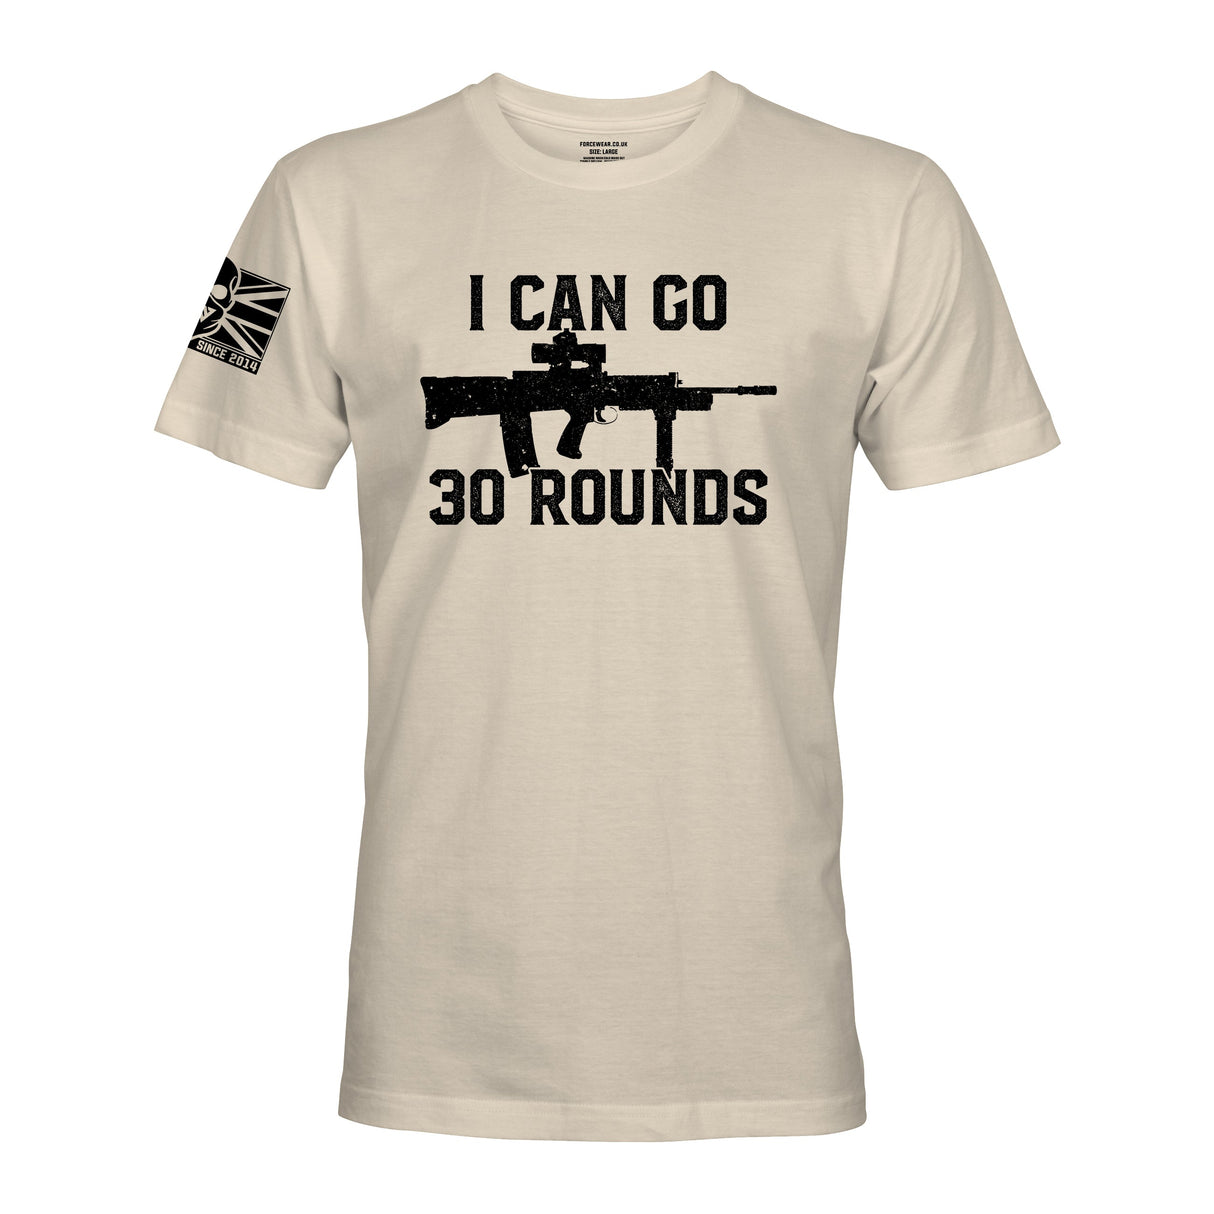 I CAN GO 30 ROUNDS - Force Wear HQ - T-SHIRTS